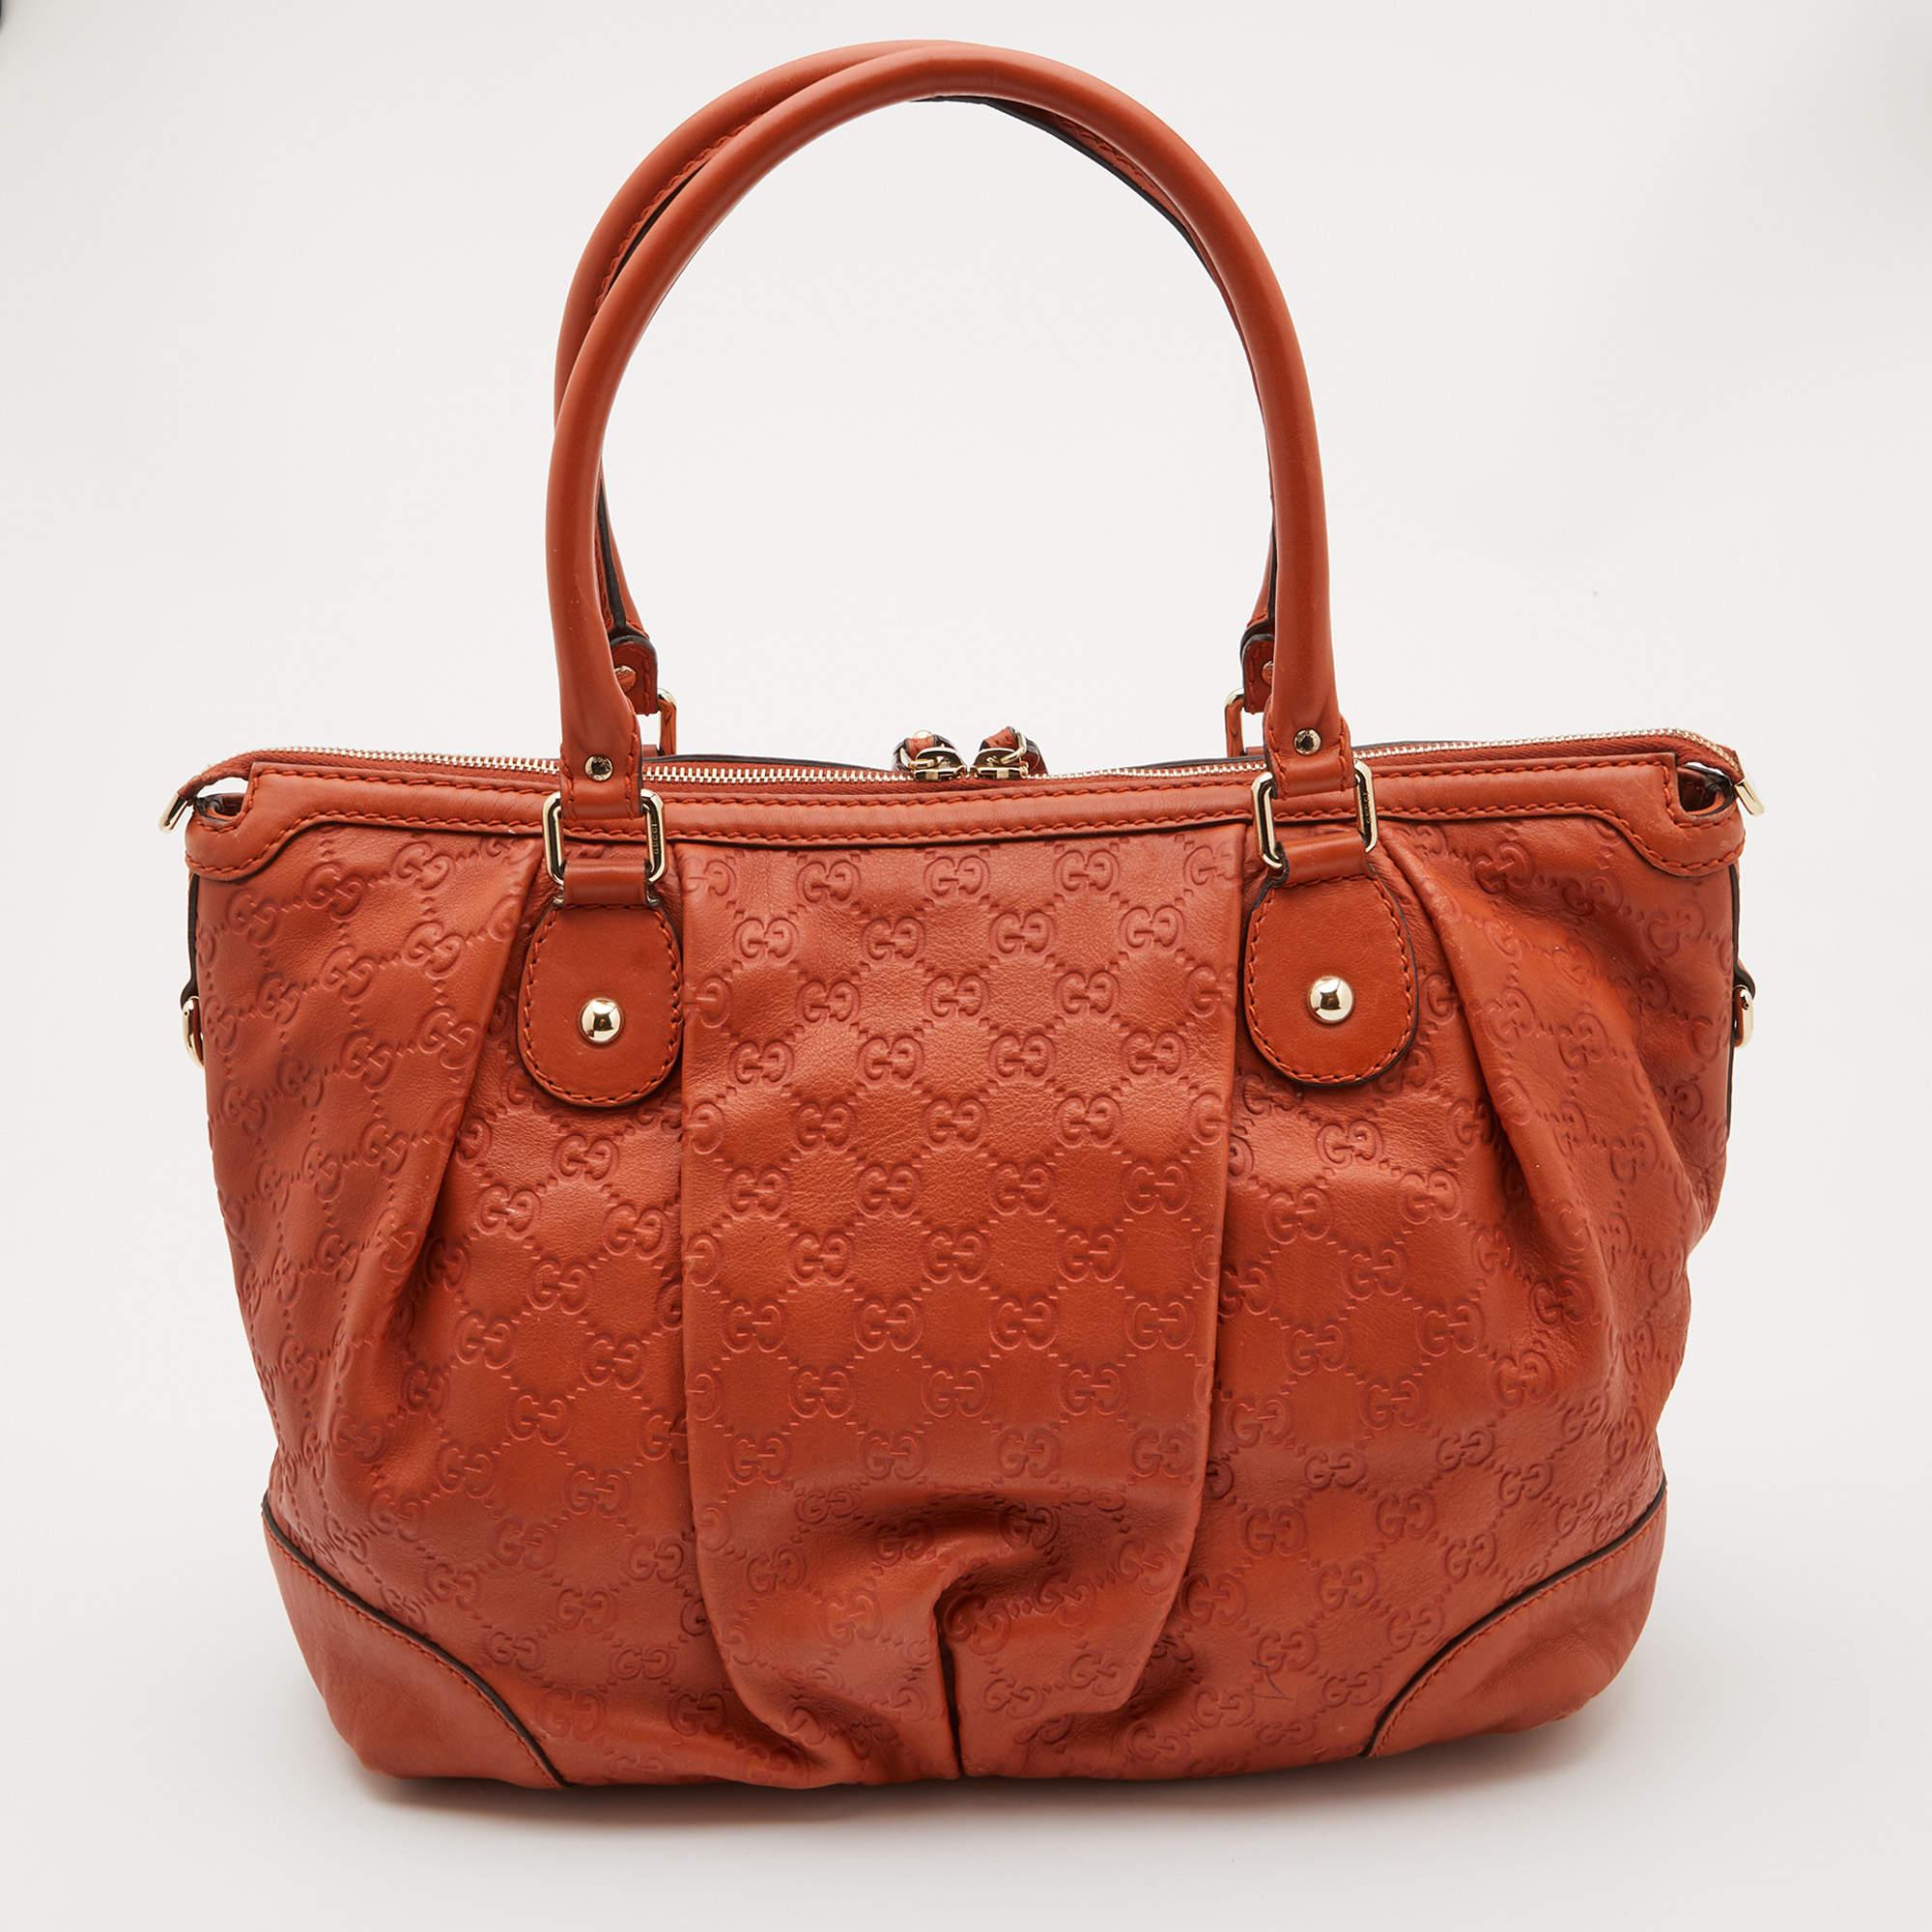 The Sukey is one of the best-selling designs from Gucci and we believe you deserve to have one too. Crafted from Guccissima leather and equipped with a spacious interior, this bag will work perfectly with any outfit. It is complete with two handles